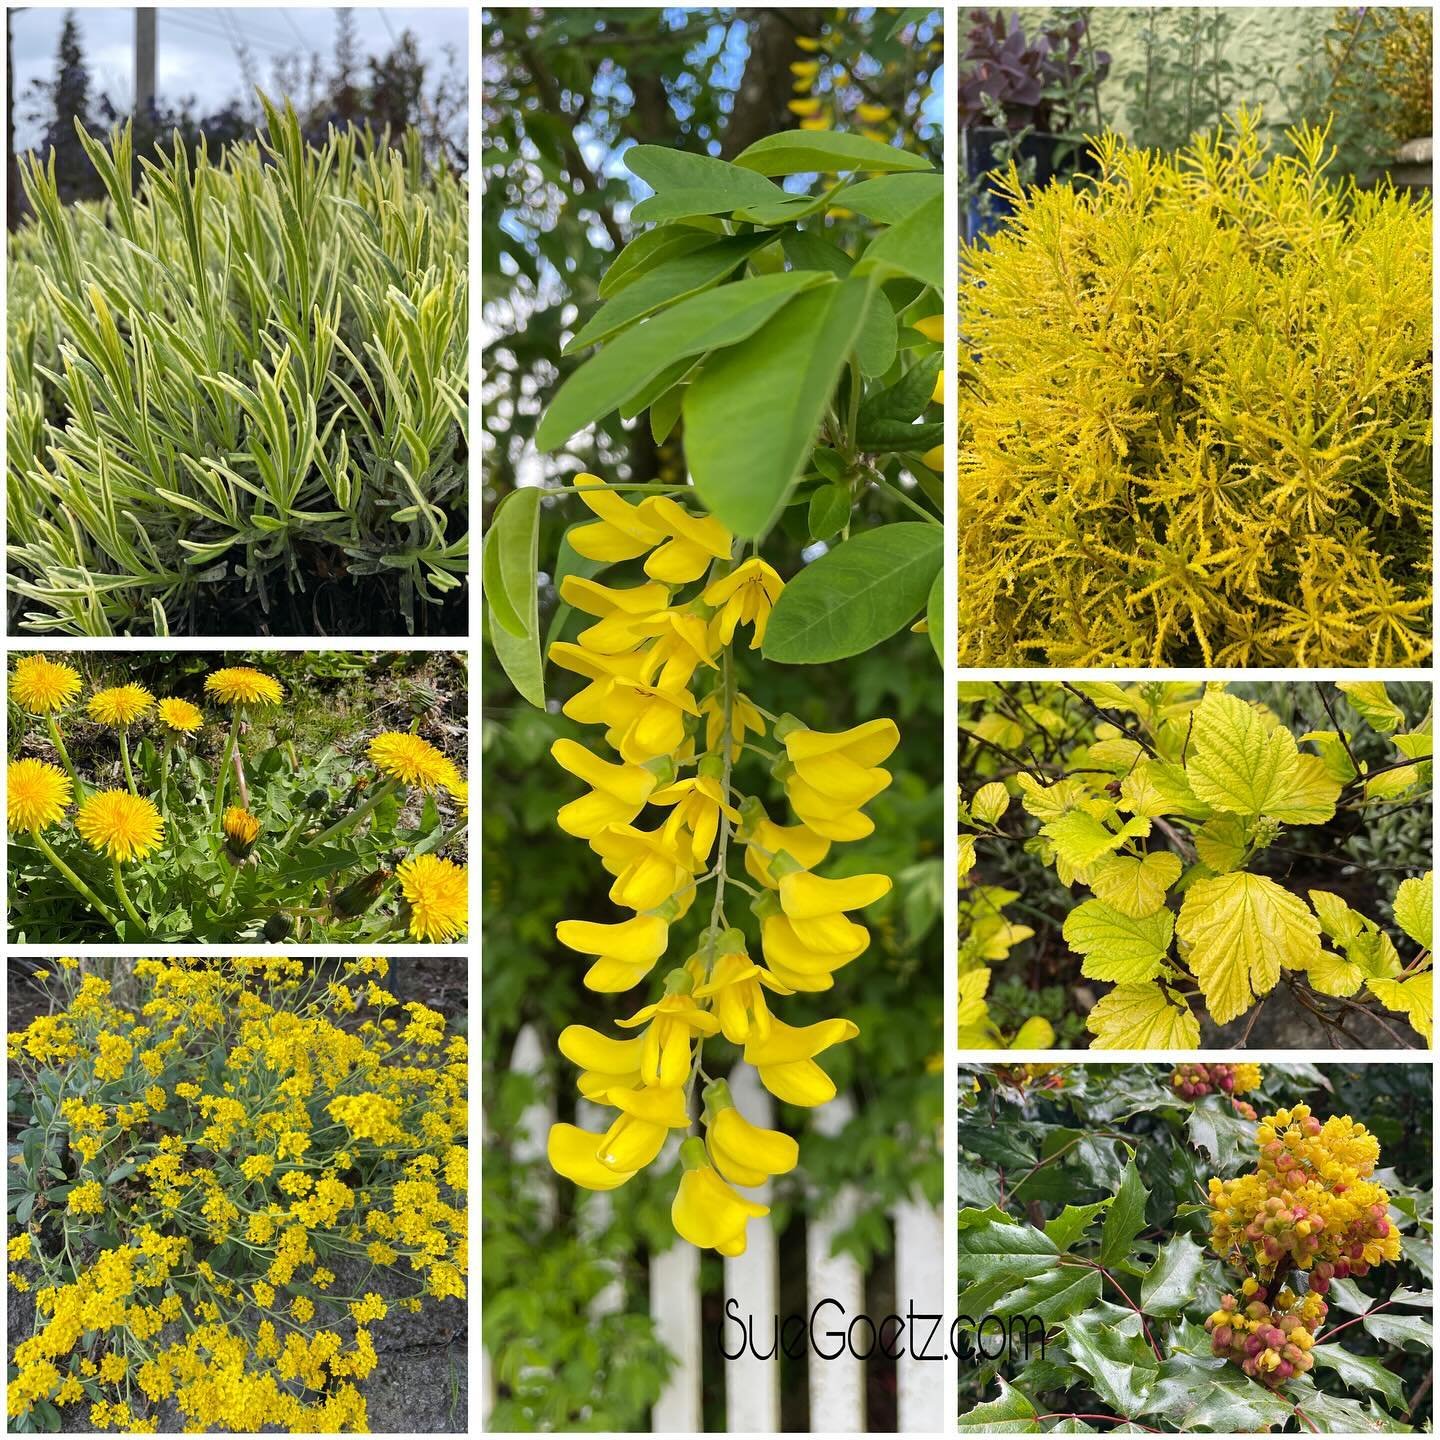 Morning walk -on the color wheel - Yellow! 
Mostly the yellow pigments of flavonoids (Flavone &amp; Flavonol)  showing up- and the dandelion gets most if its color from Lutein💛 - in case you were curious-😄 I do love a little nerdy plant pigment tal